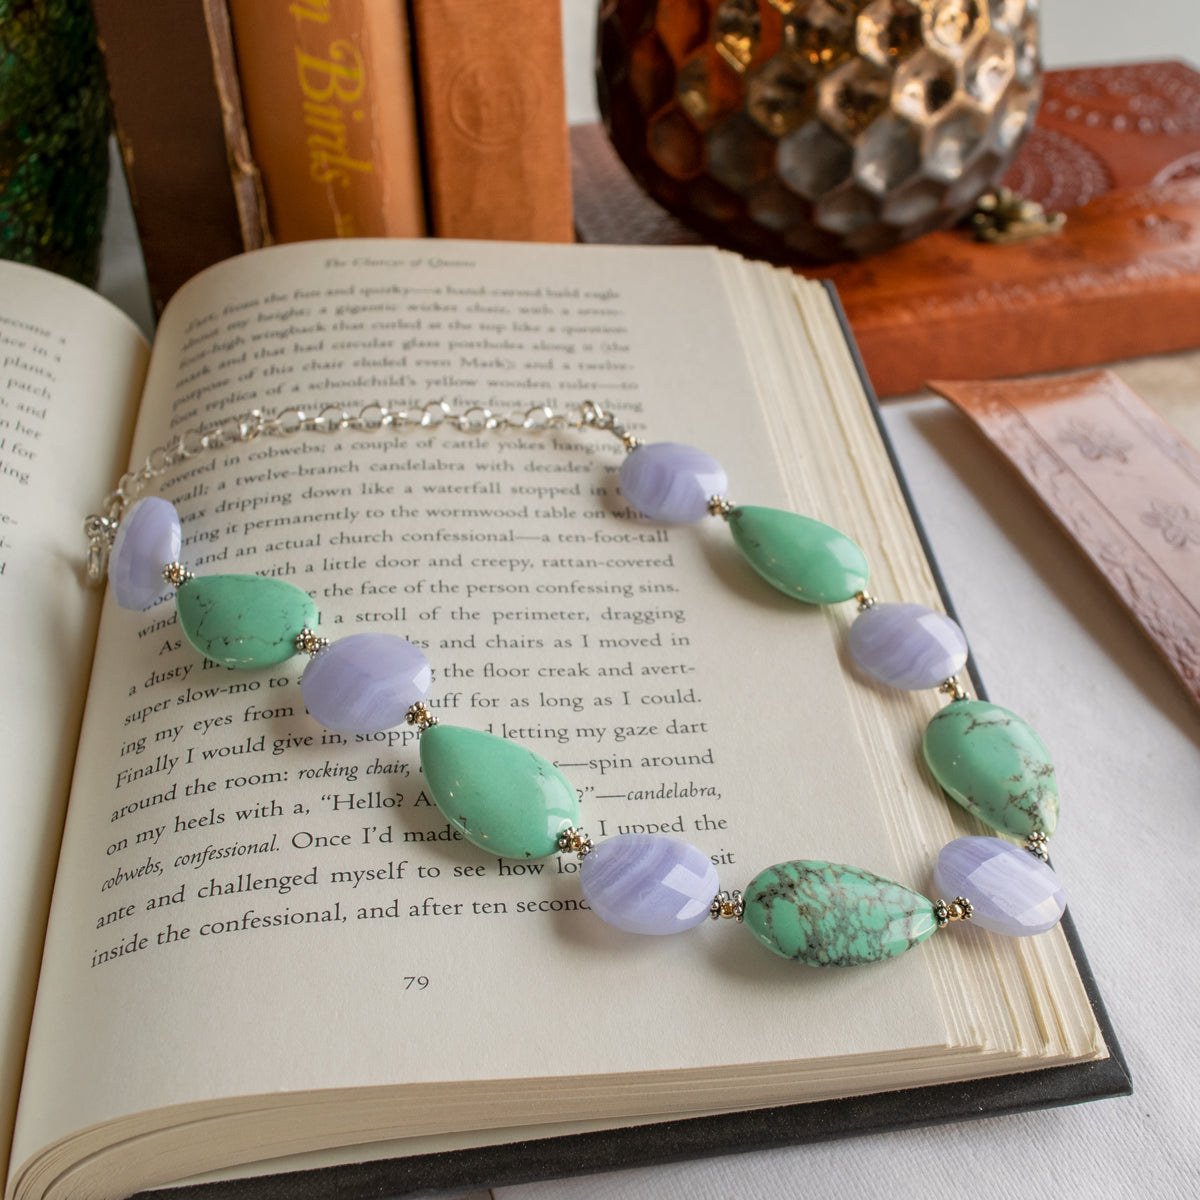 Blue Lace Agate & Green Turquoise Necklace